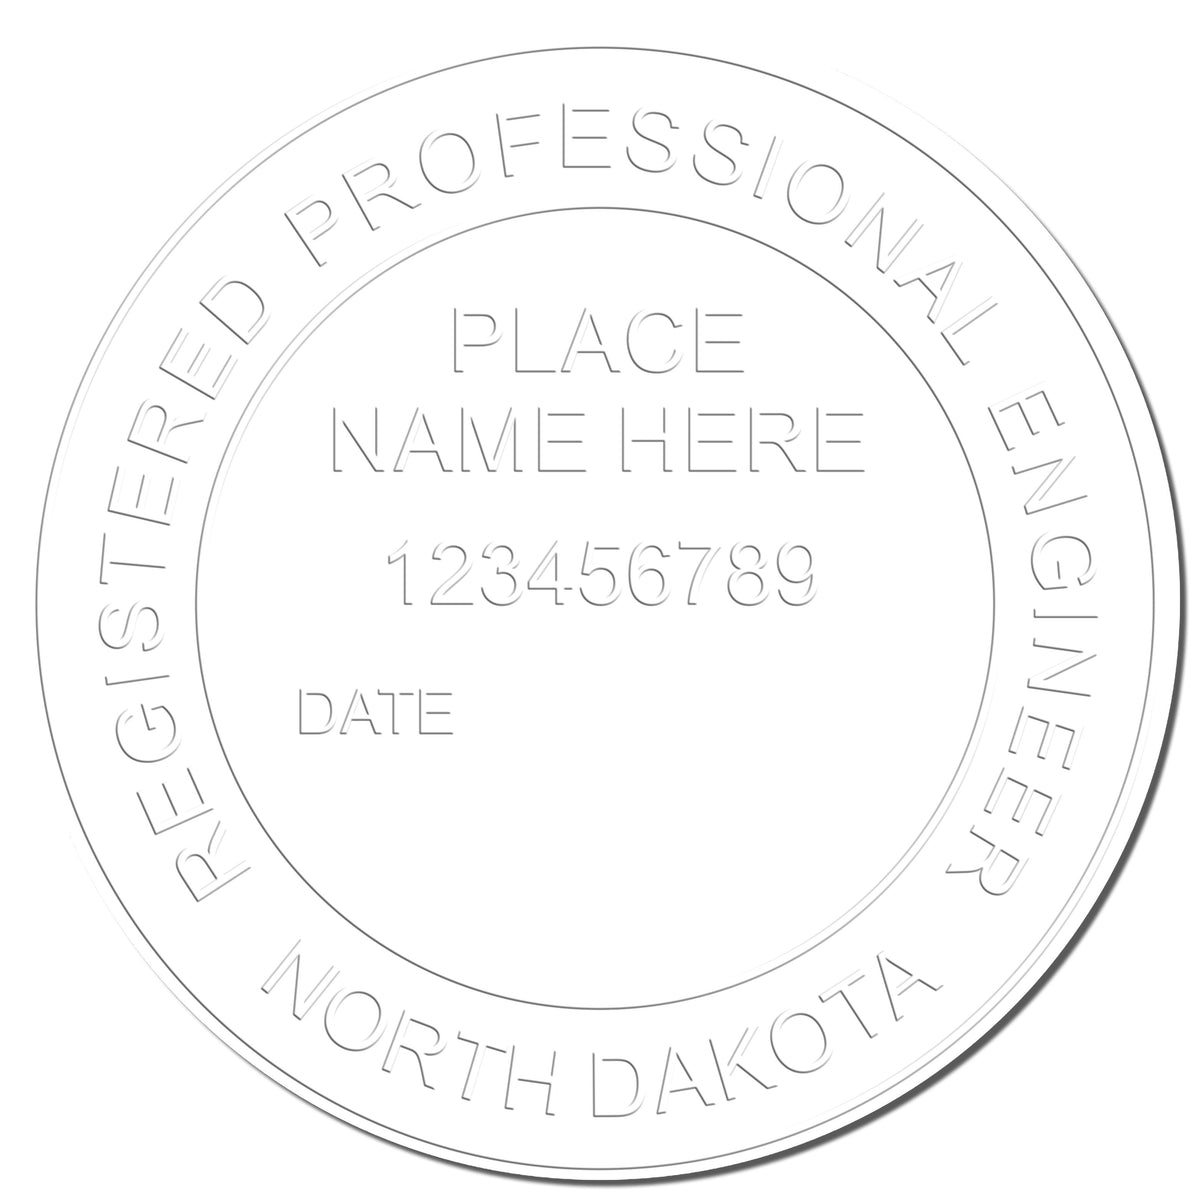 The Long Reach North Dakota PE Seal stamp impression comes to life with a crisp, detailed photo on paper - showcasing true professional quality.